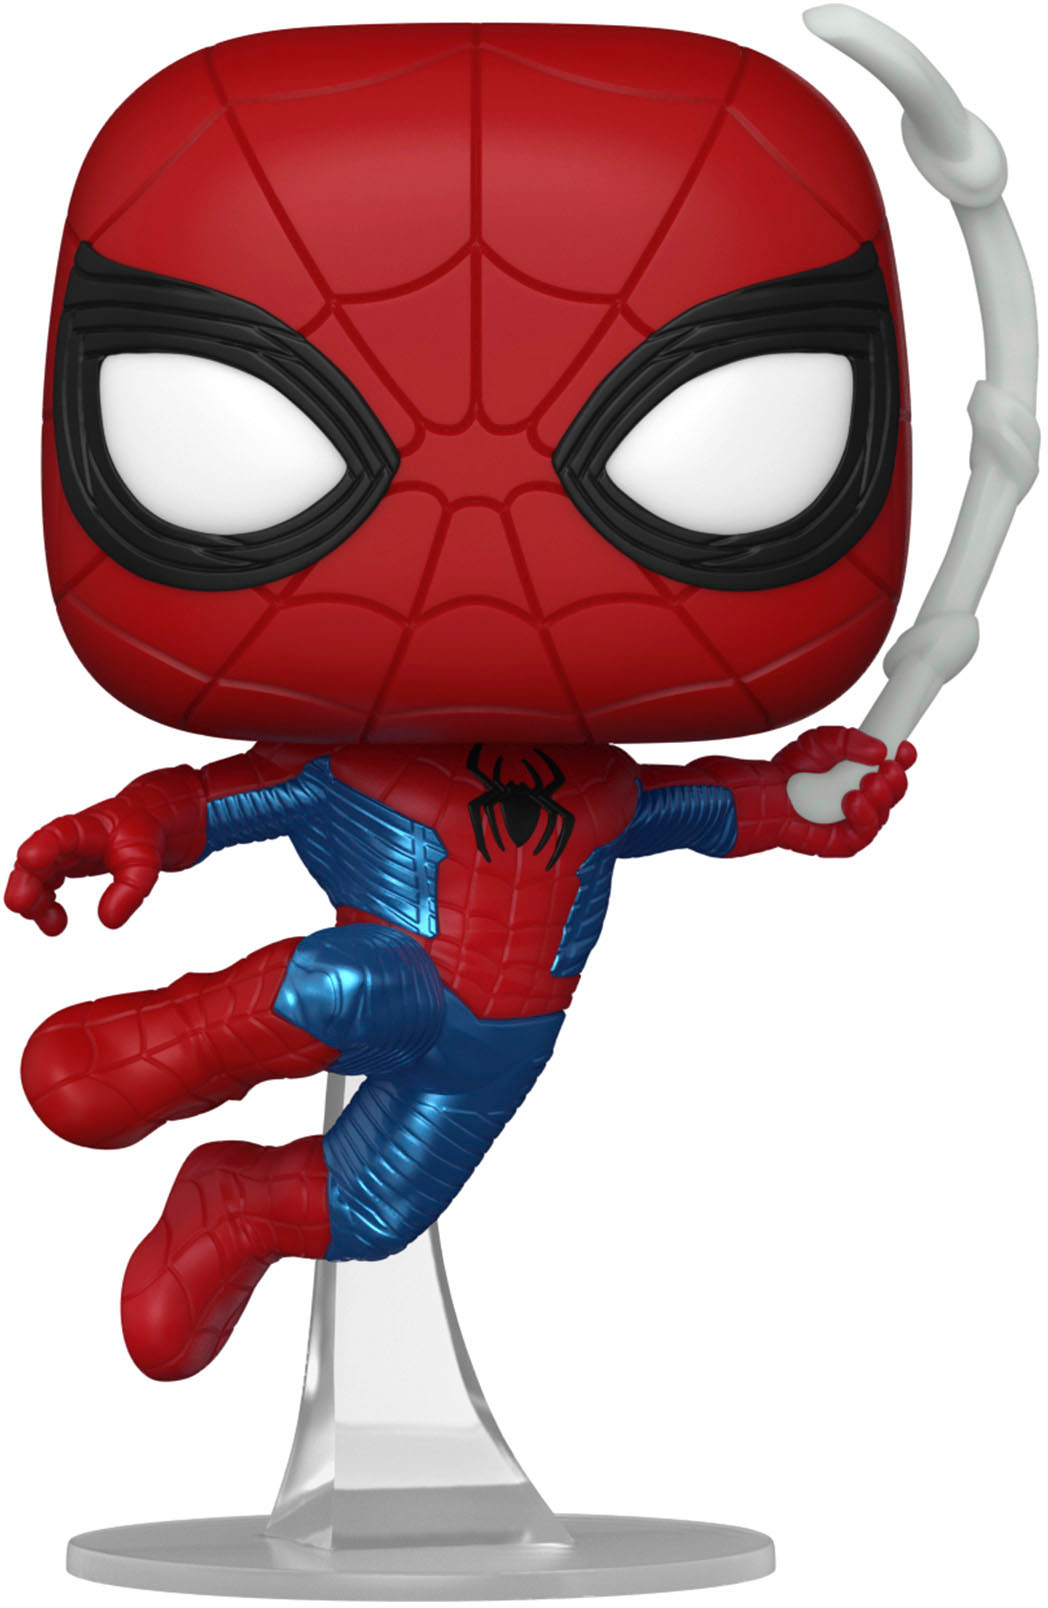 Buy Funko Pop! Spider-Man: Miles Morales from £14.99 (Today